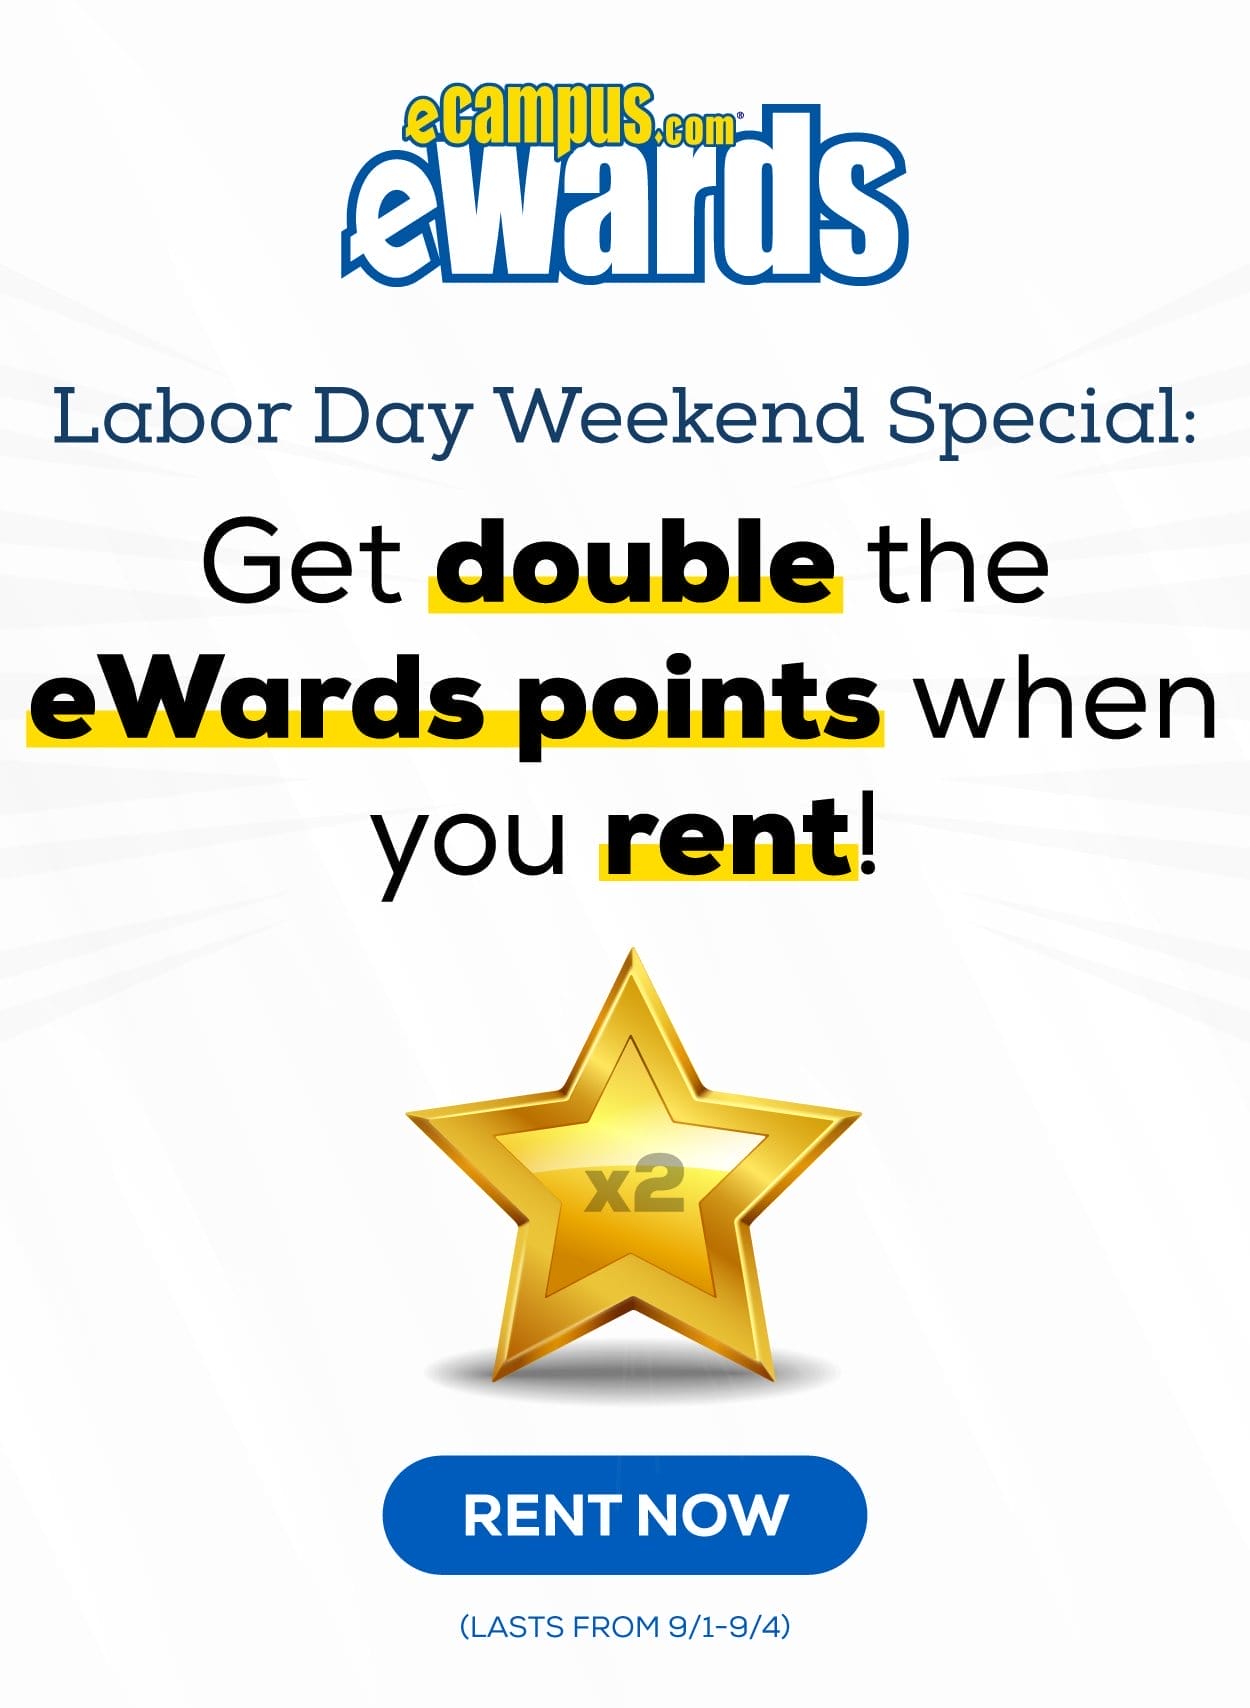 eCampus.com eWards | Labor Day Weekend Special: Get double the eWards points when you rent! (Lasts from 9/1-9/4)